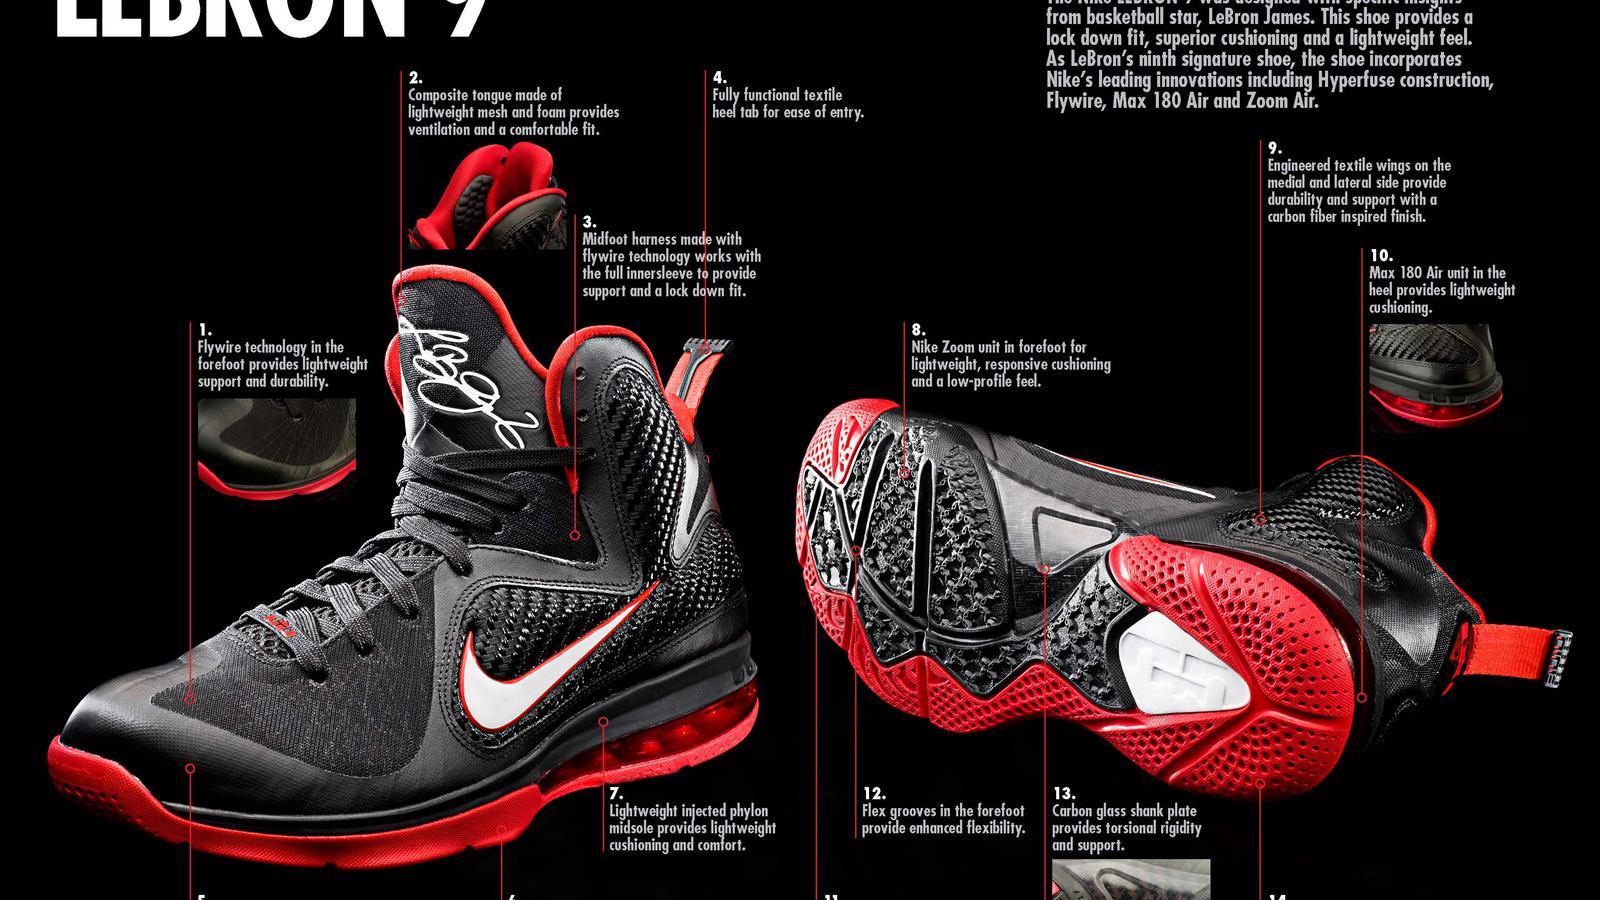 How to Find the Best Budget Basketball Shoes